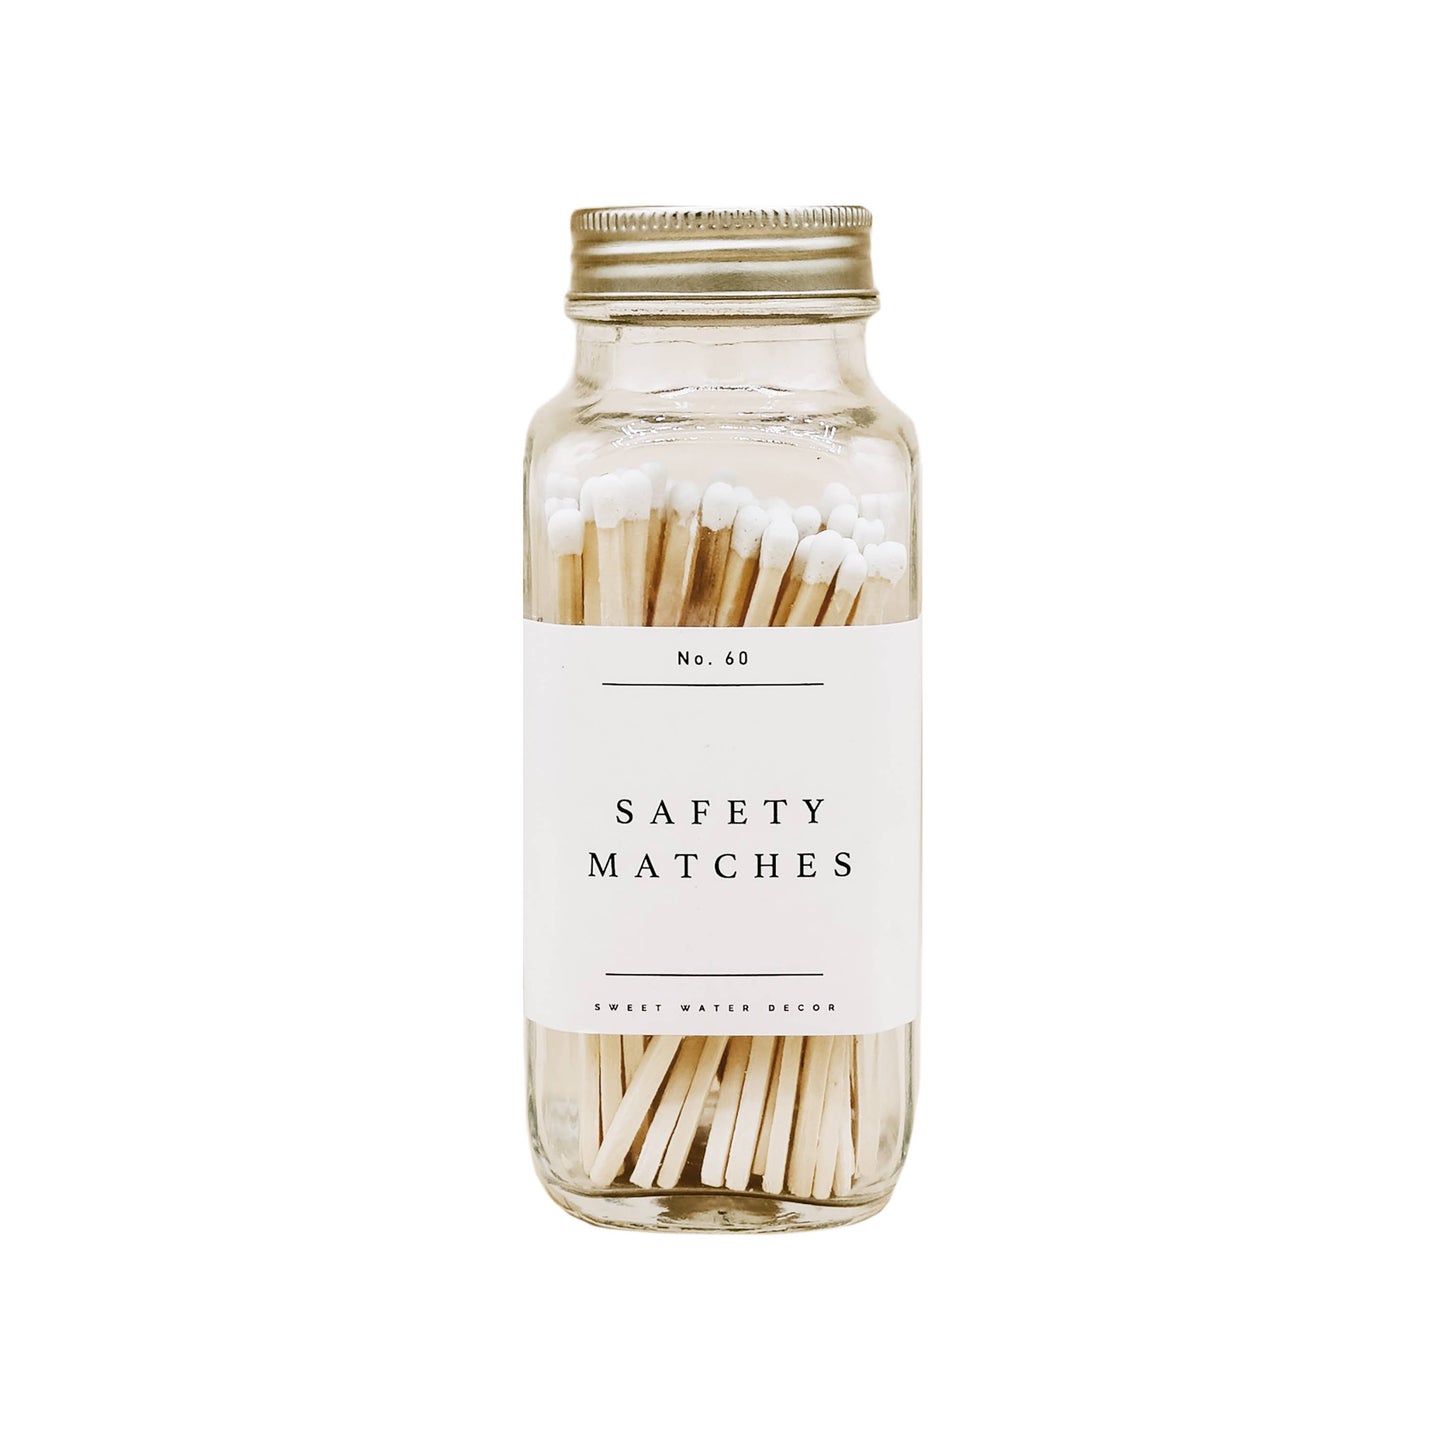 Sweet Water Decor - Safety Matches - White - 60 Count, 3.75"